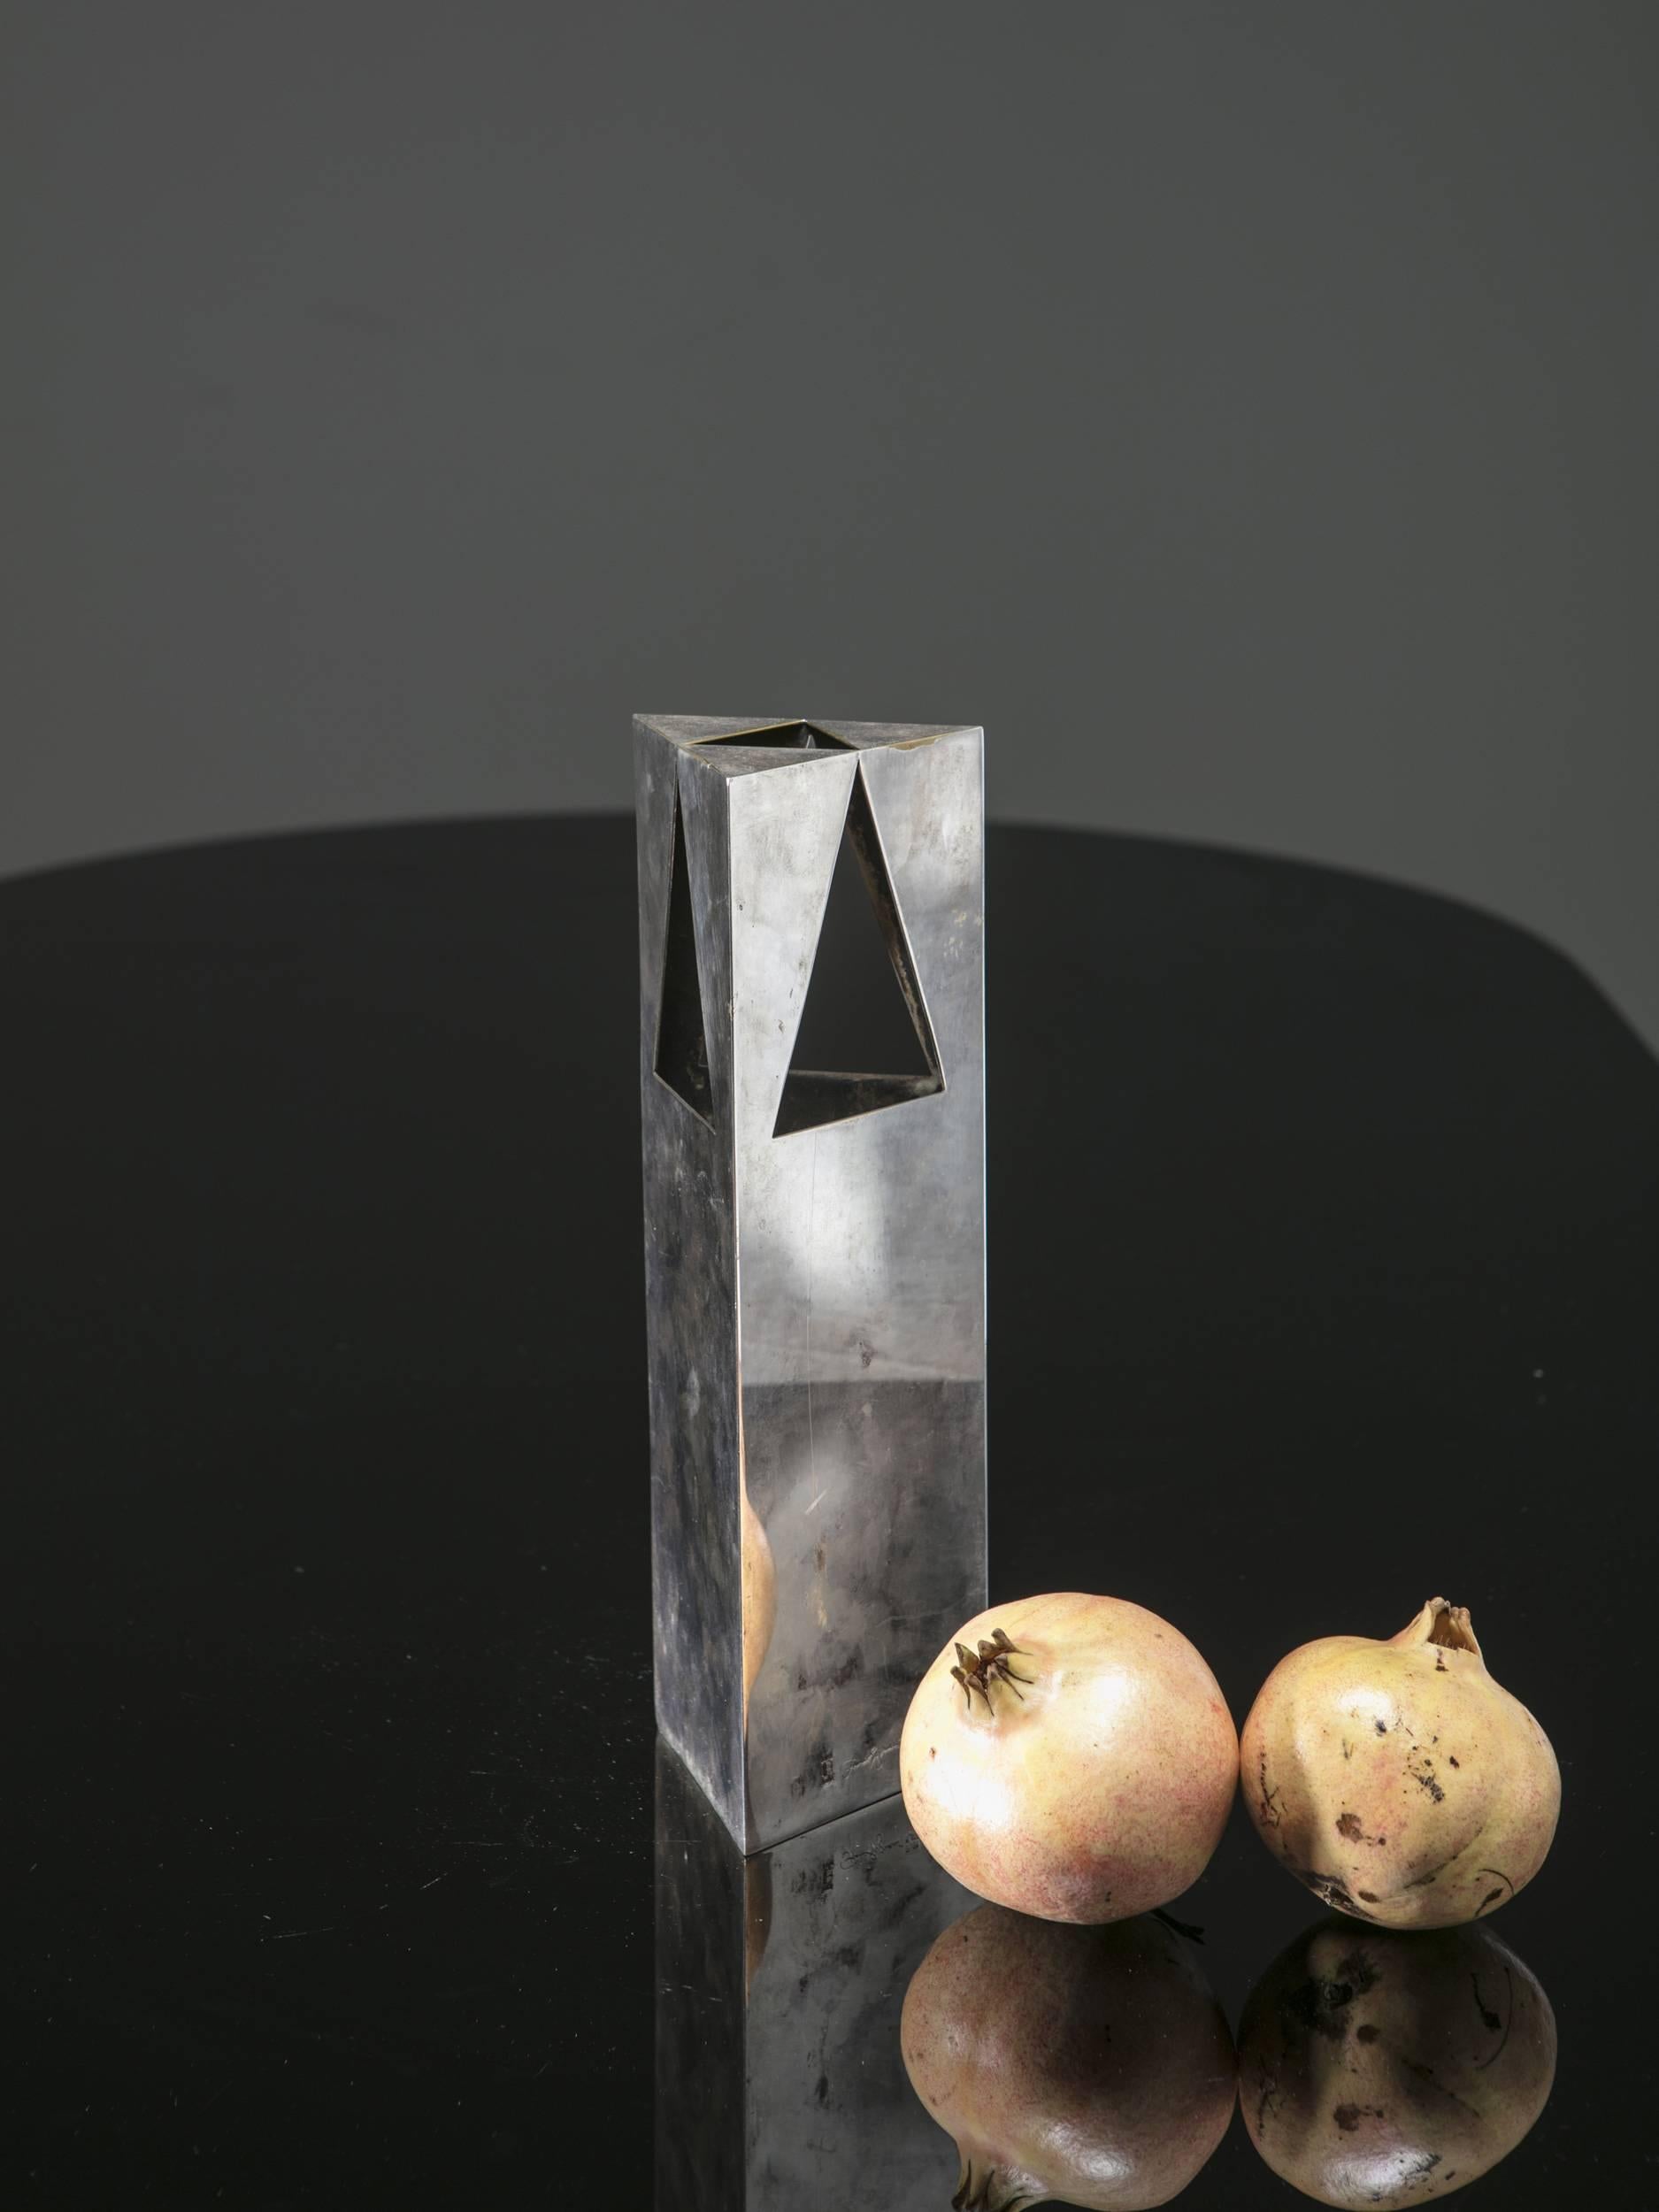 Minimalist Silver Plate Vase by Franco Grignani for Bacci